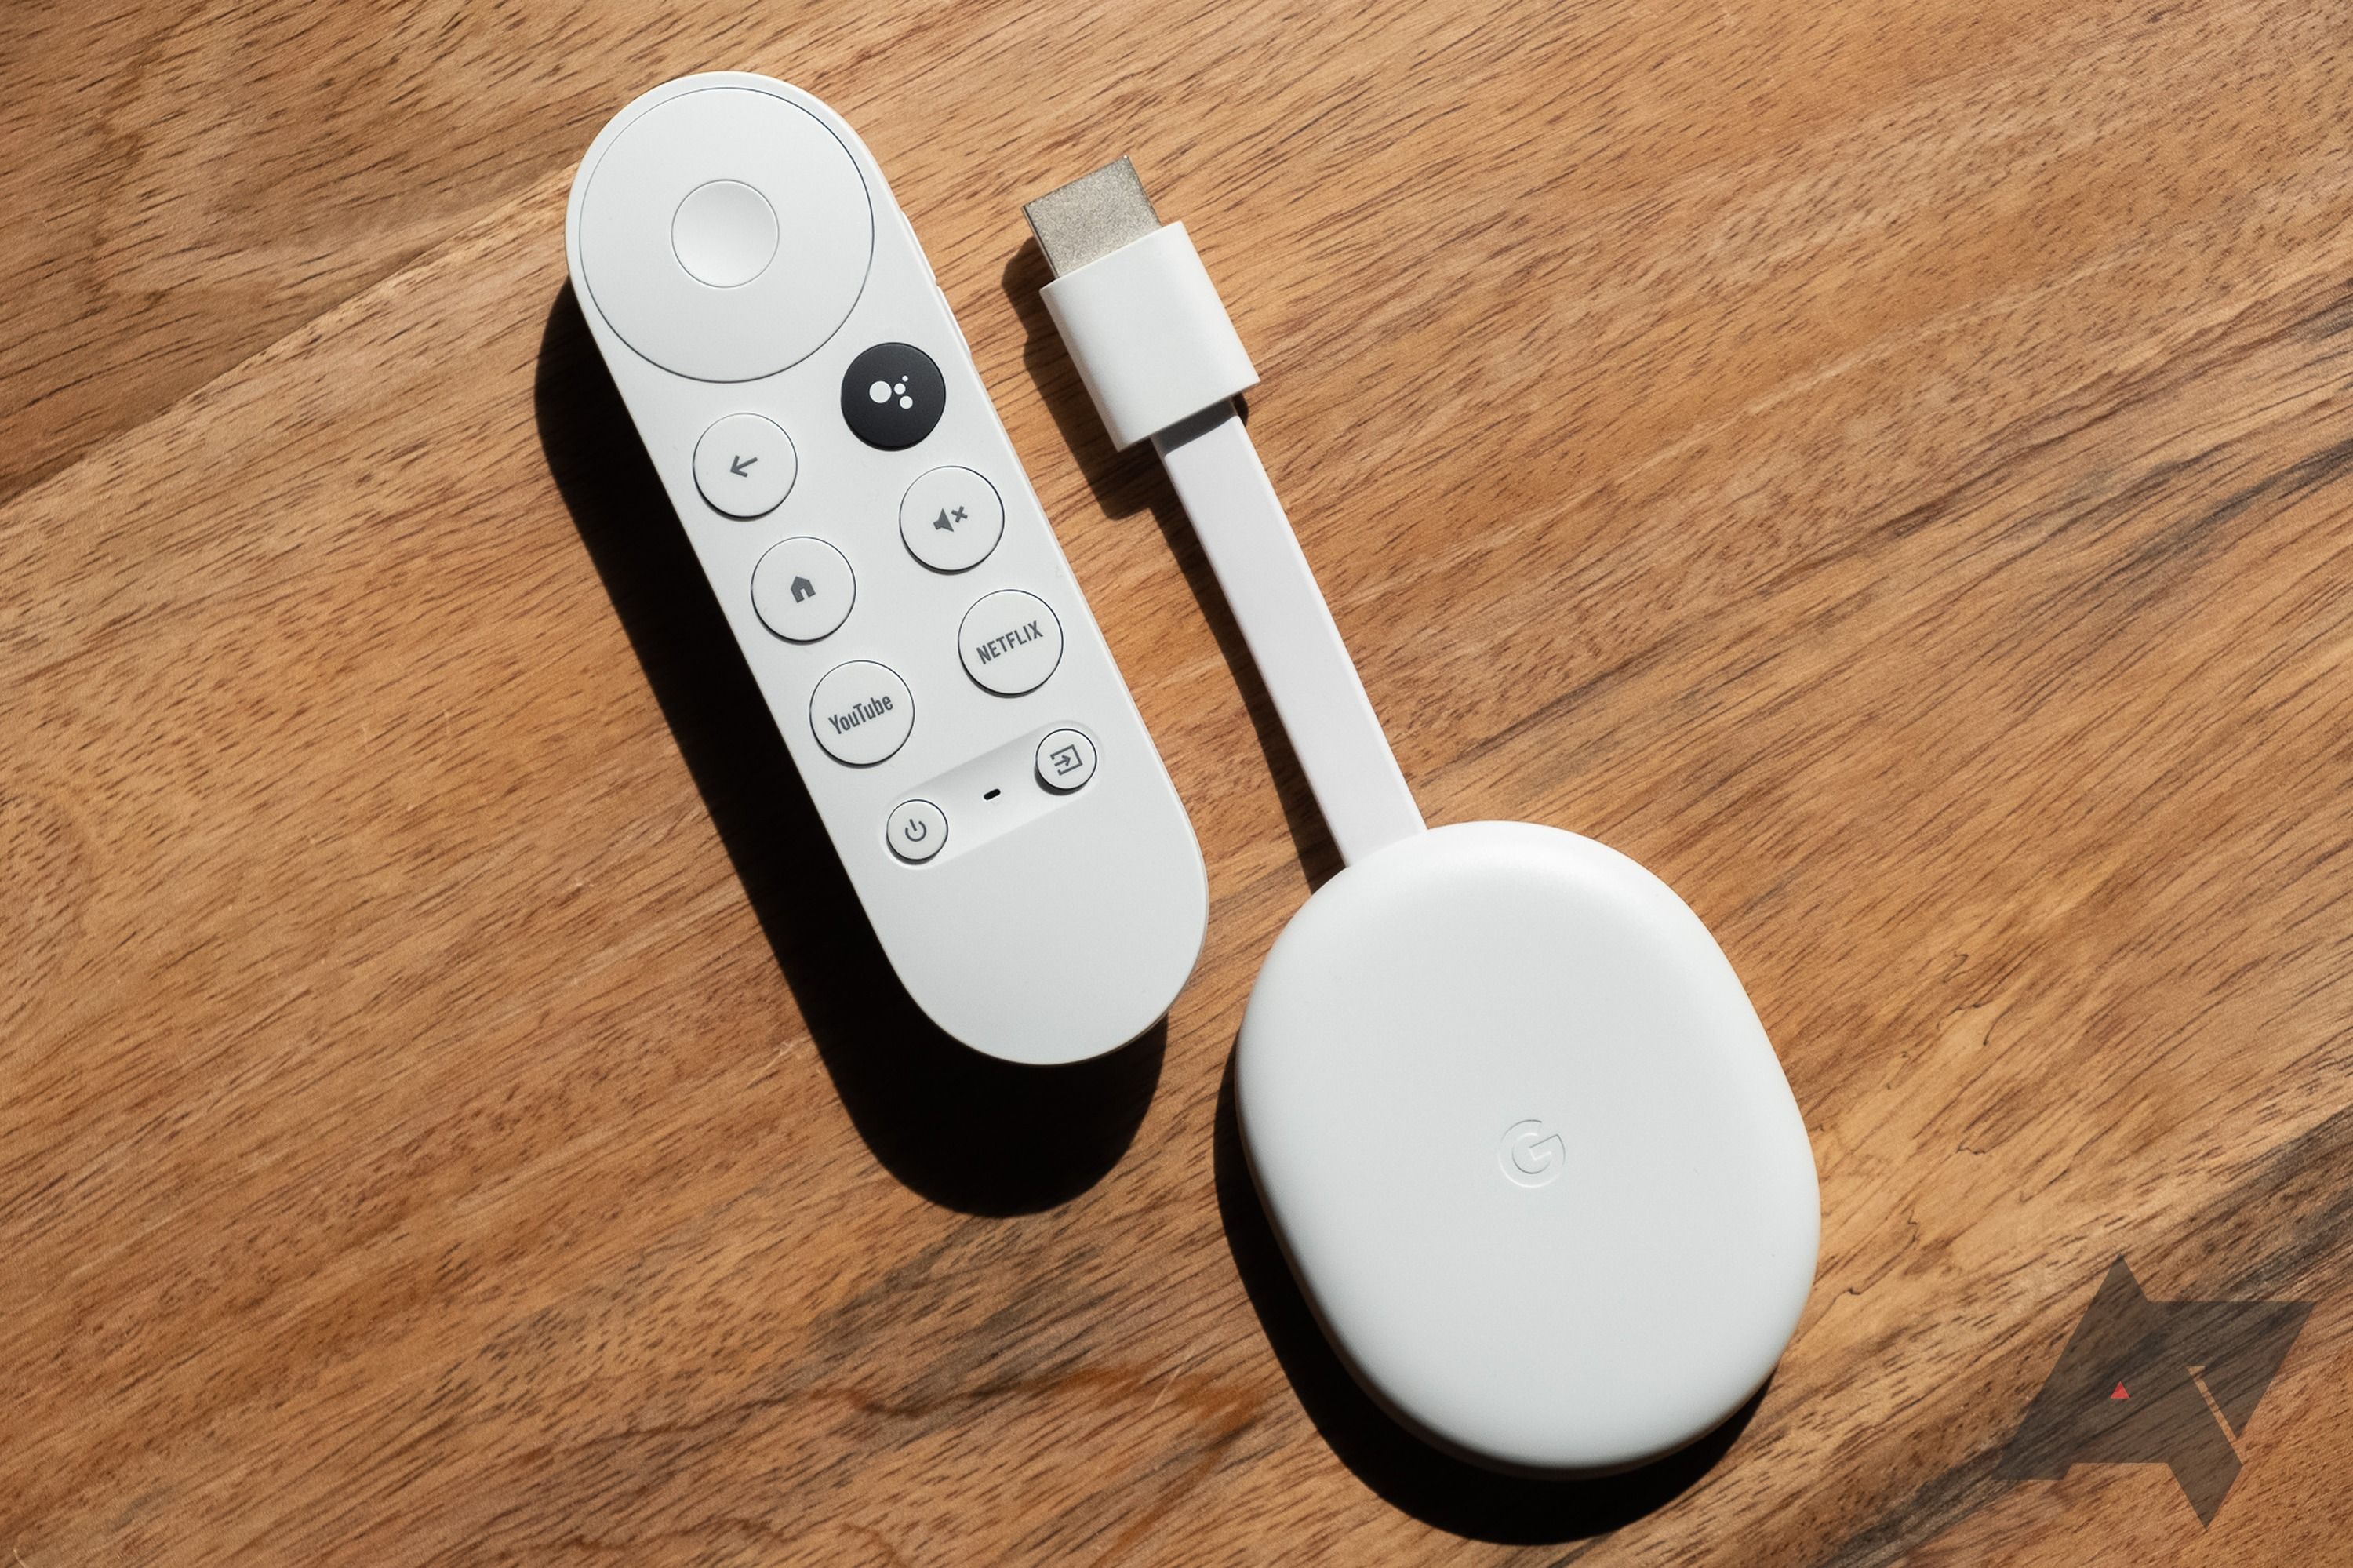 Google Chromecast with Google TV (HD) in the Media Streaming